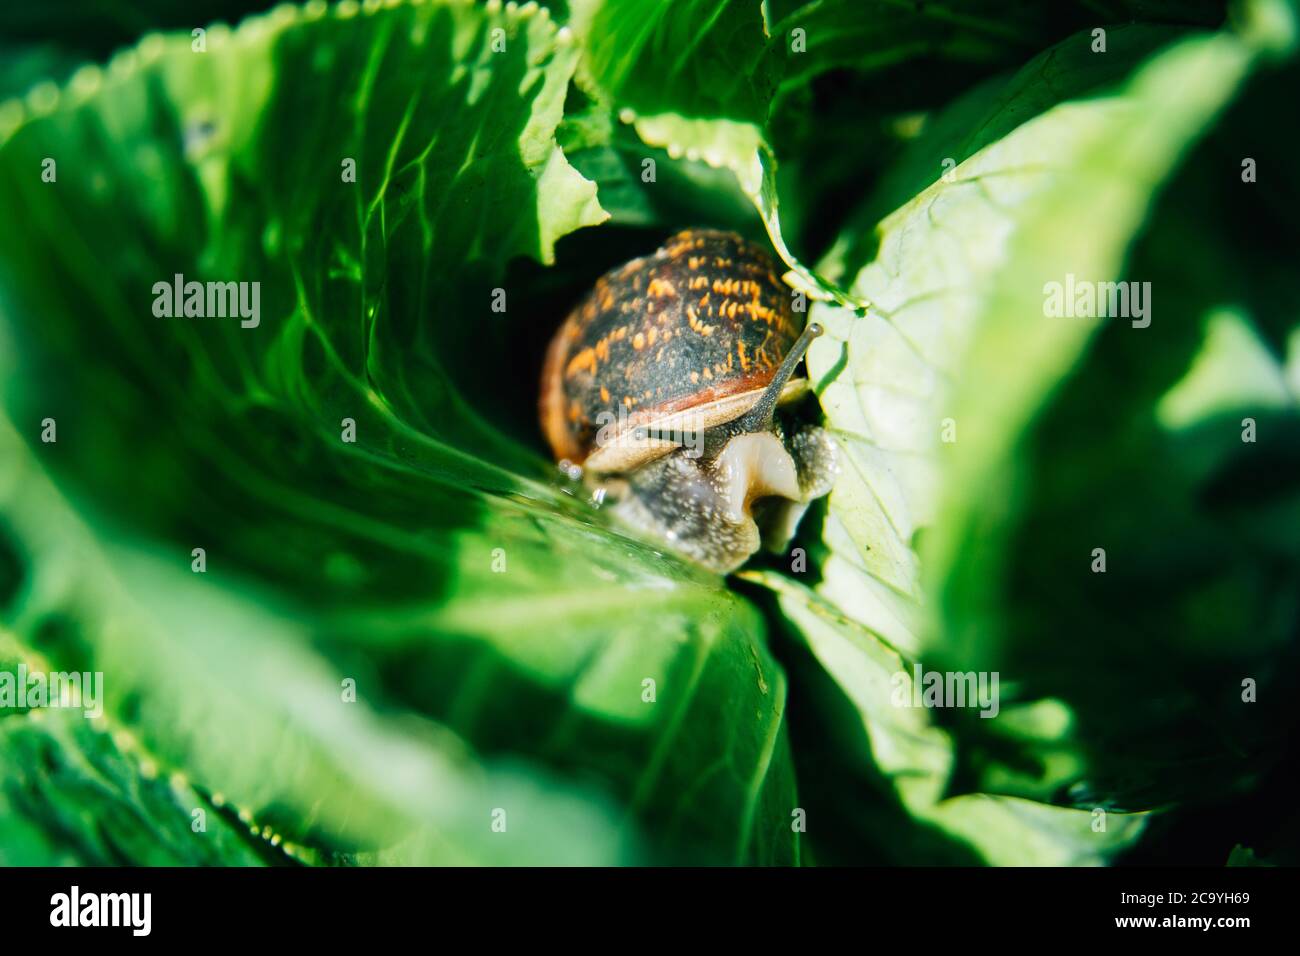 a snail eating a cabbage in a garden vegetable patch or allotment. Cabbage being eaten by snail outside Stock Photo